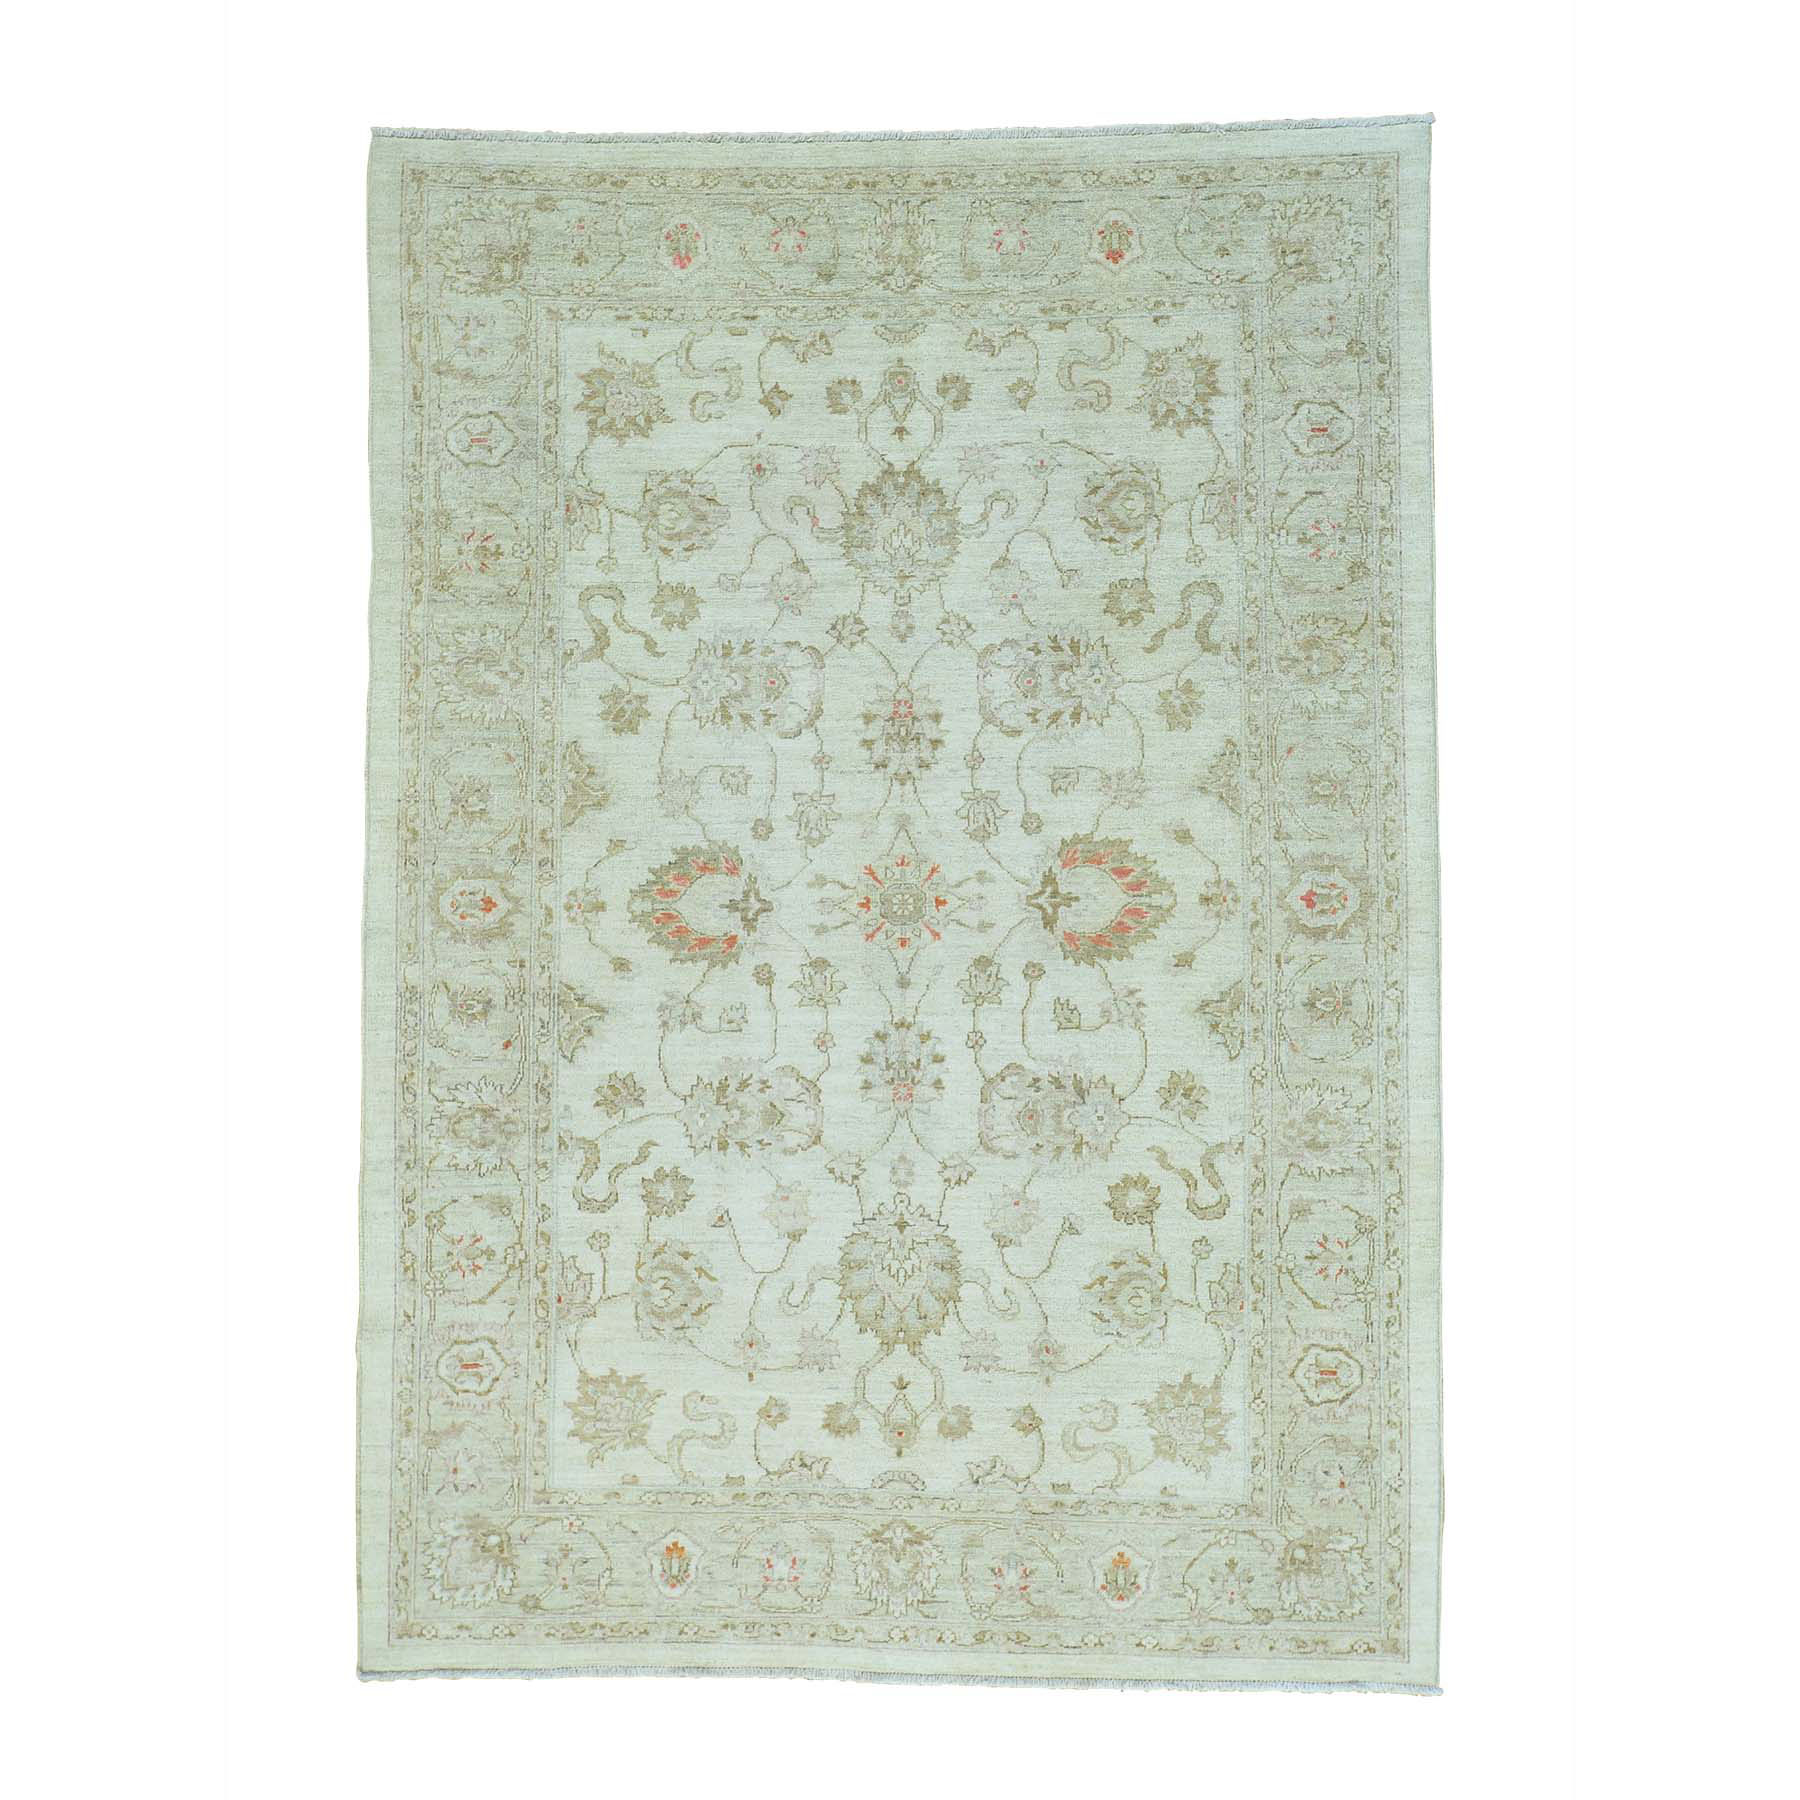 6'x8'9" Oushak Ivory Pure Wool White Wash Hand Woven Oriental Rug 